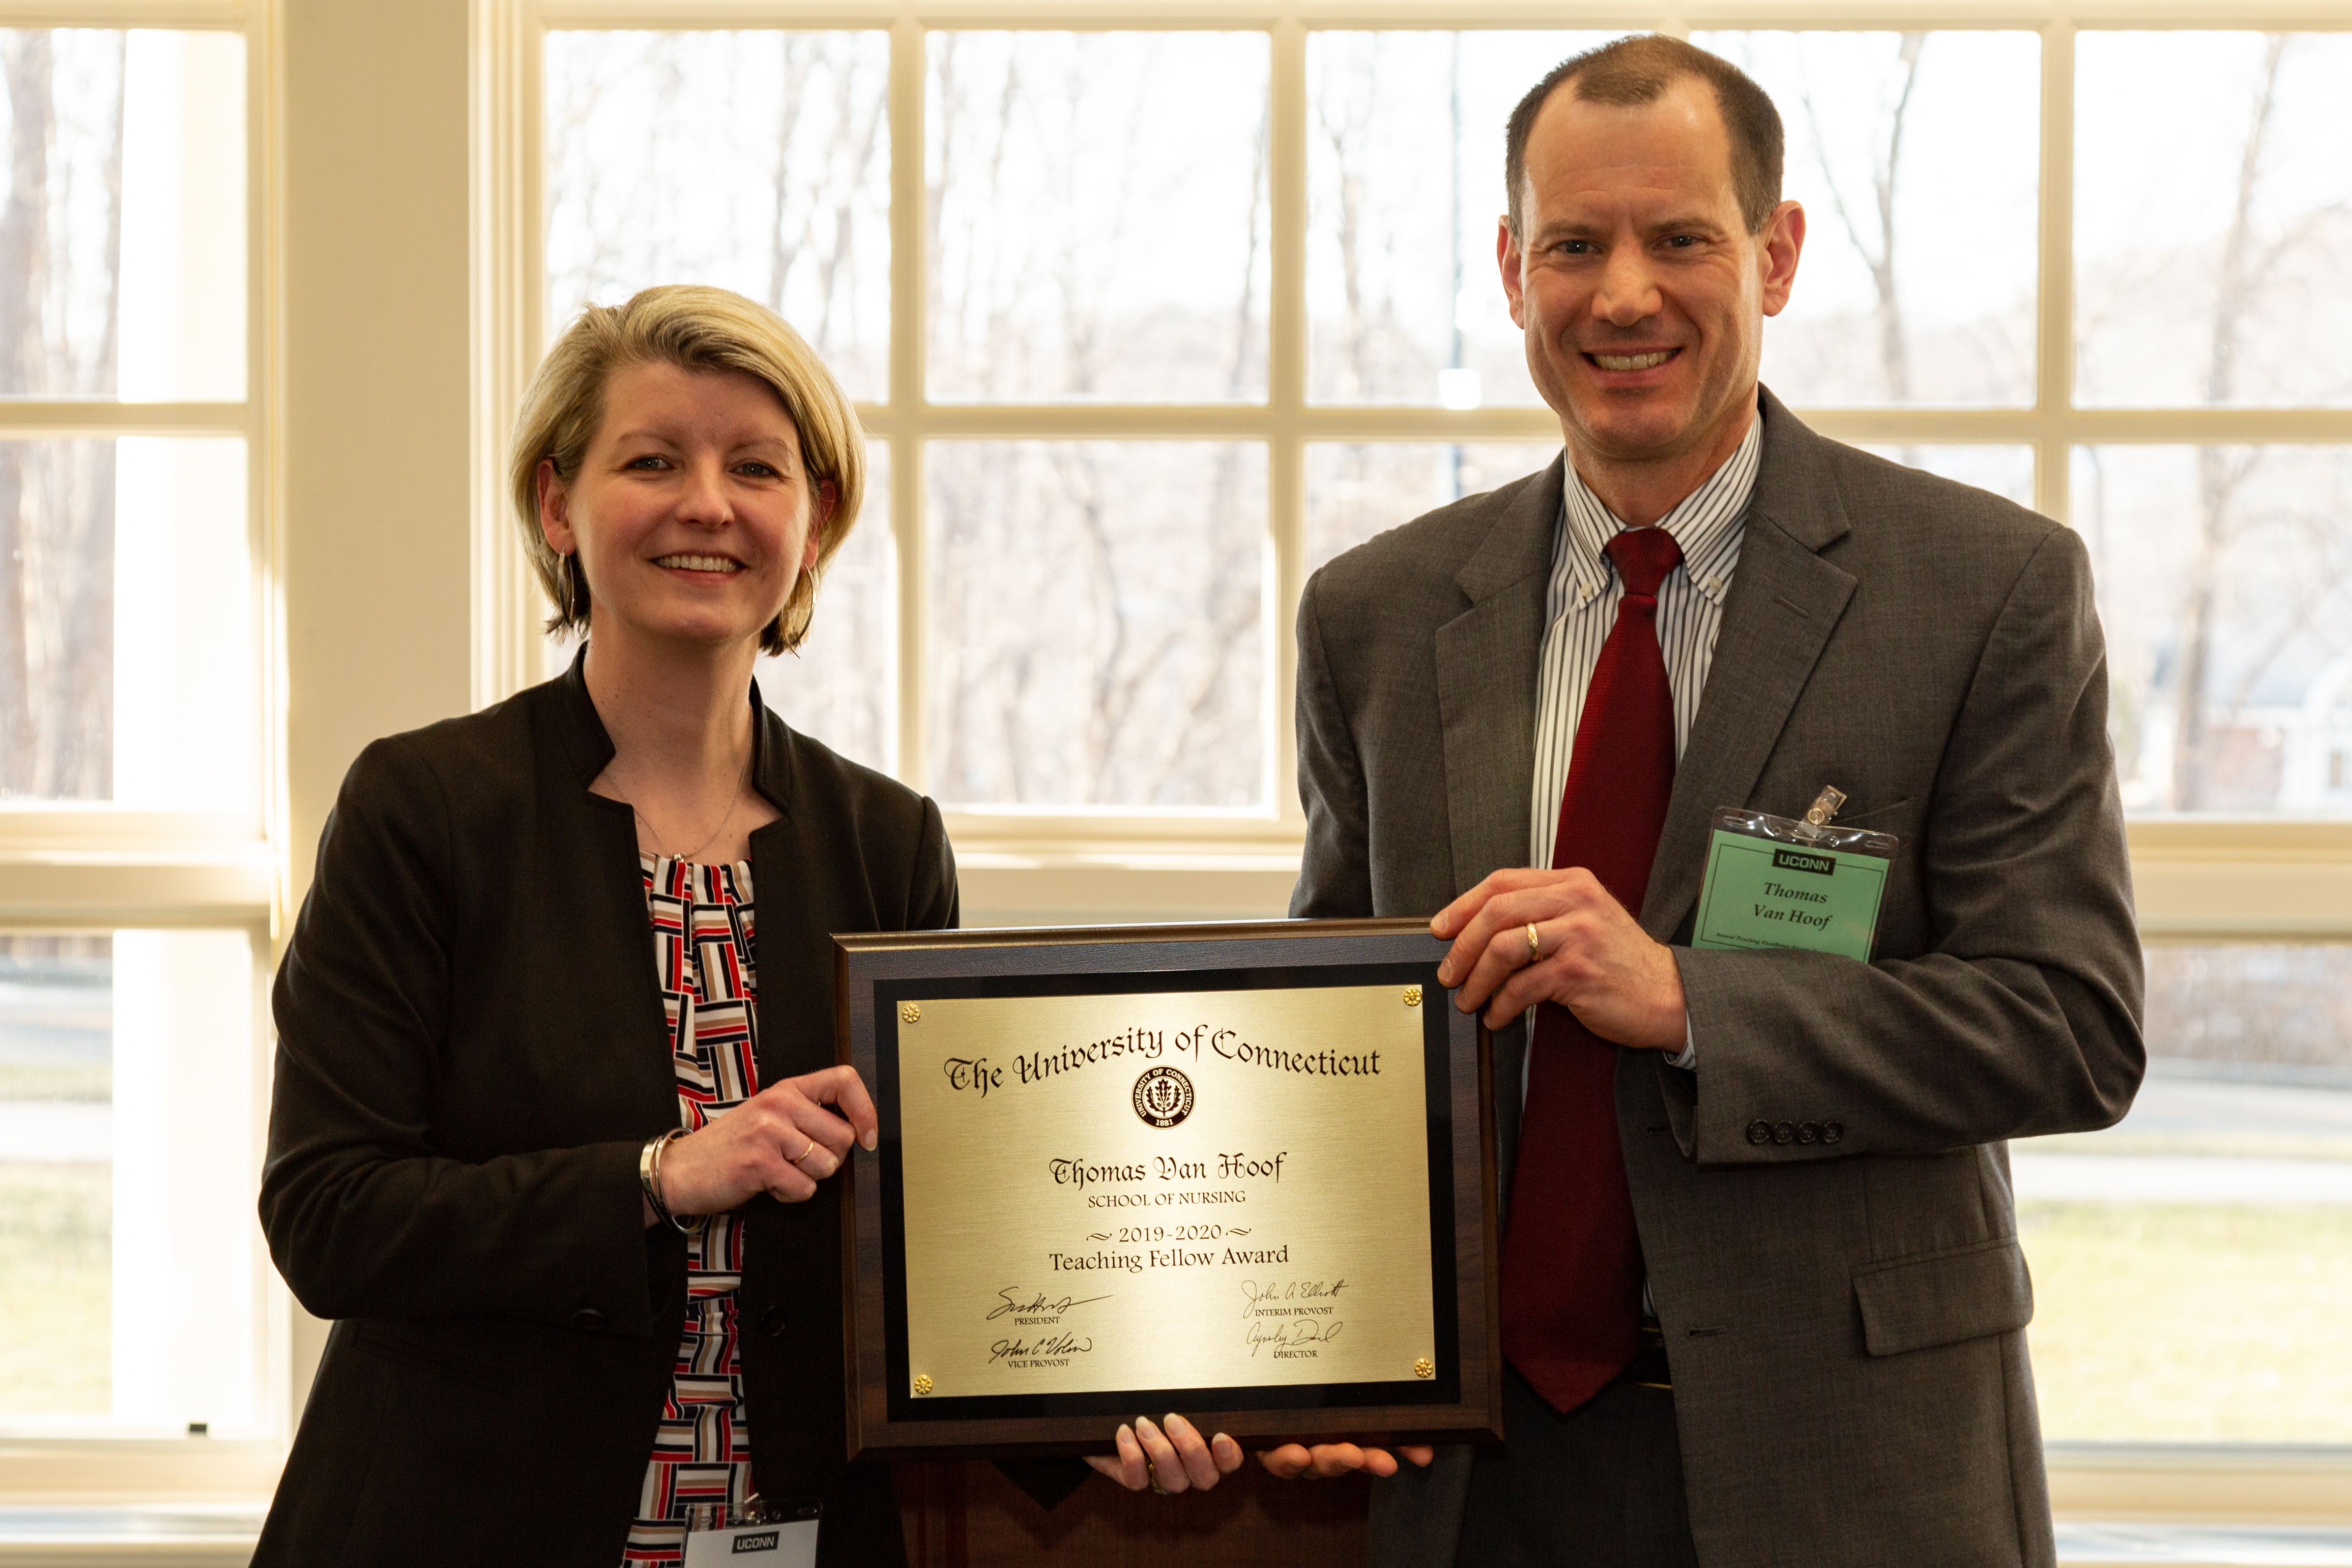 Anysley Diamond and Thomas Van Hoof hold an plaque honoring Van Hoof as a Center for Excellence in Teaching 2019-2020 University Teaching Fellow